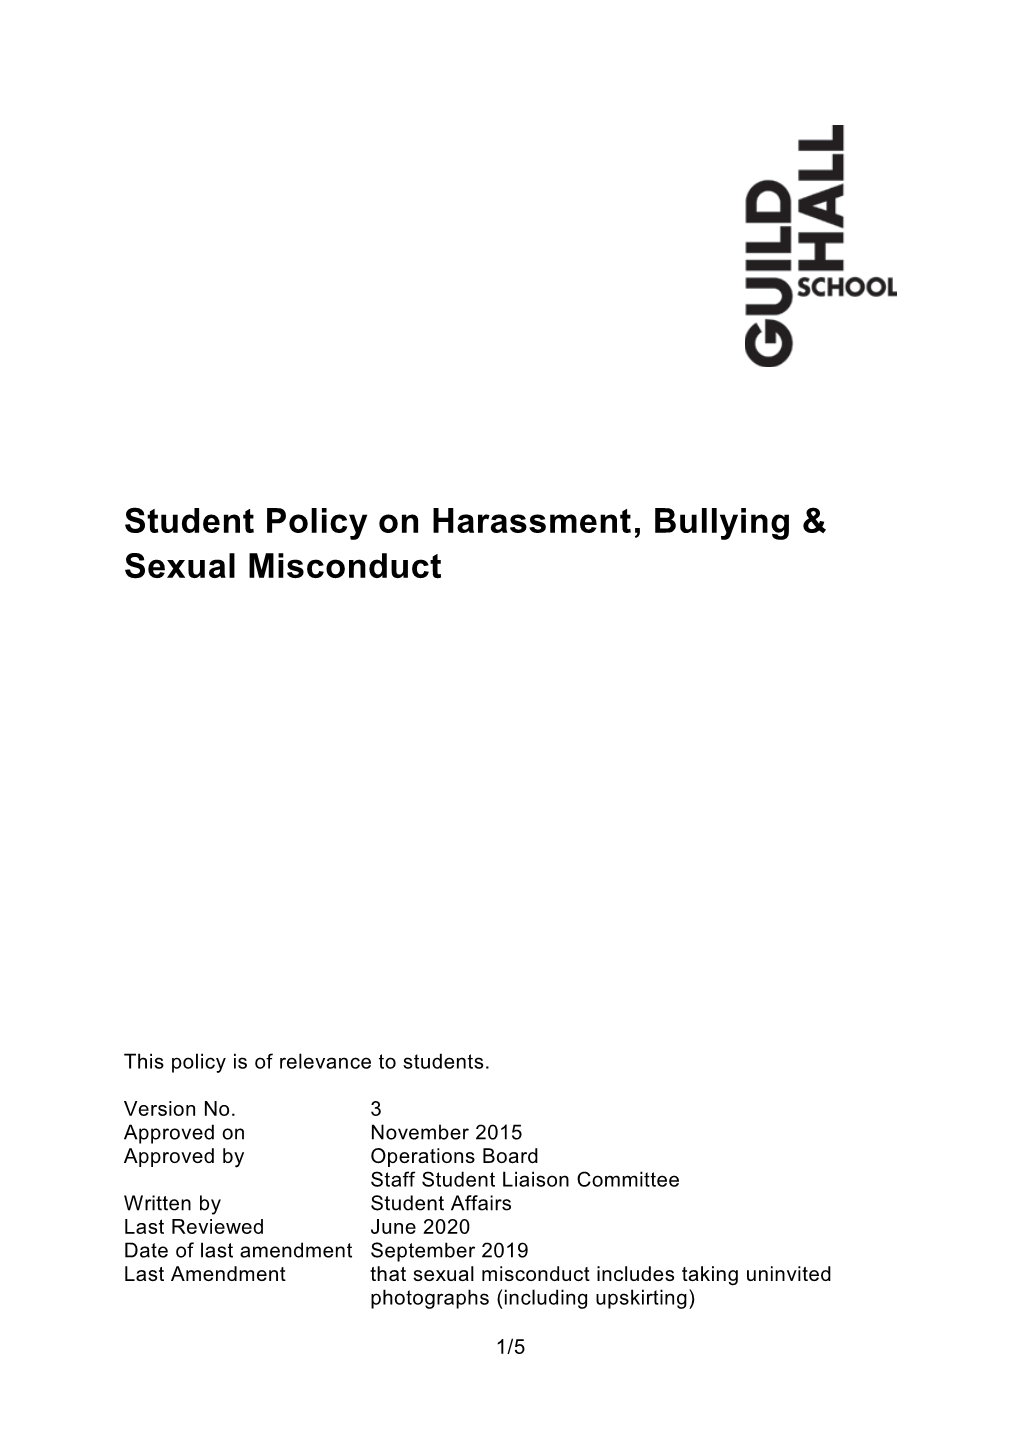 Student Policy on Harassment, Bullying and Sexual Misconduct